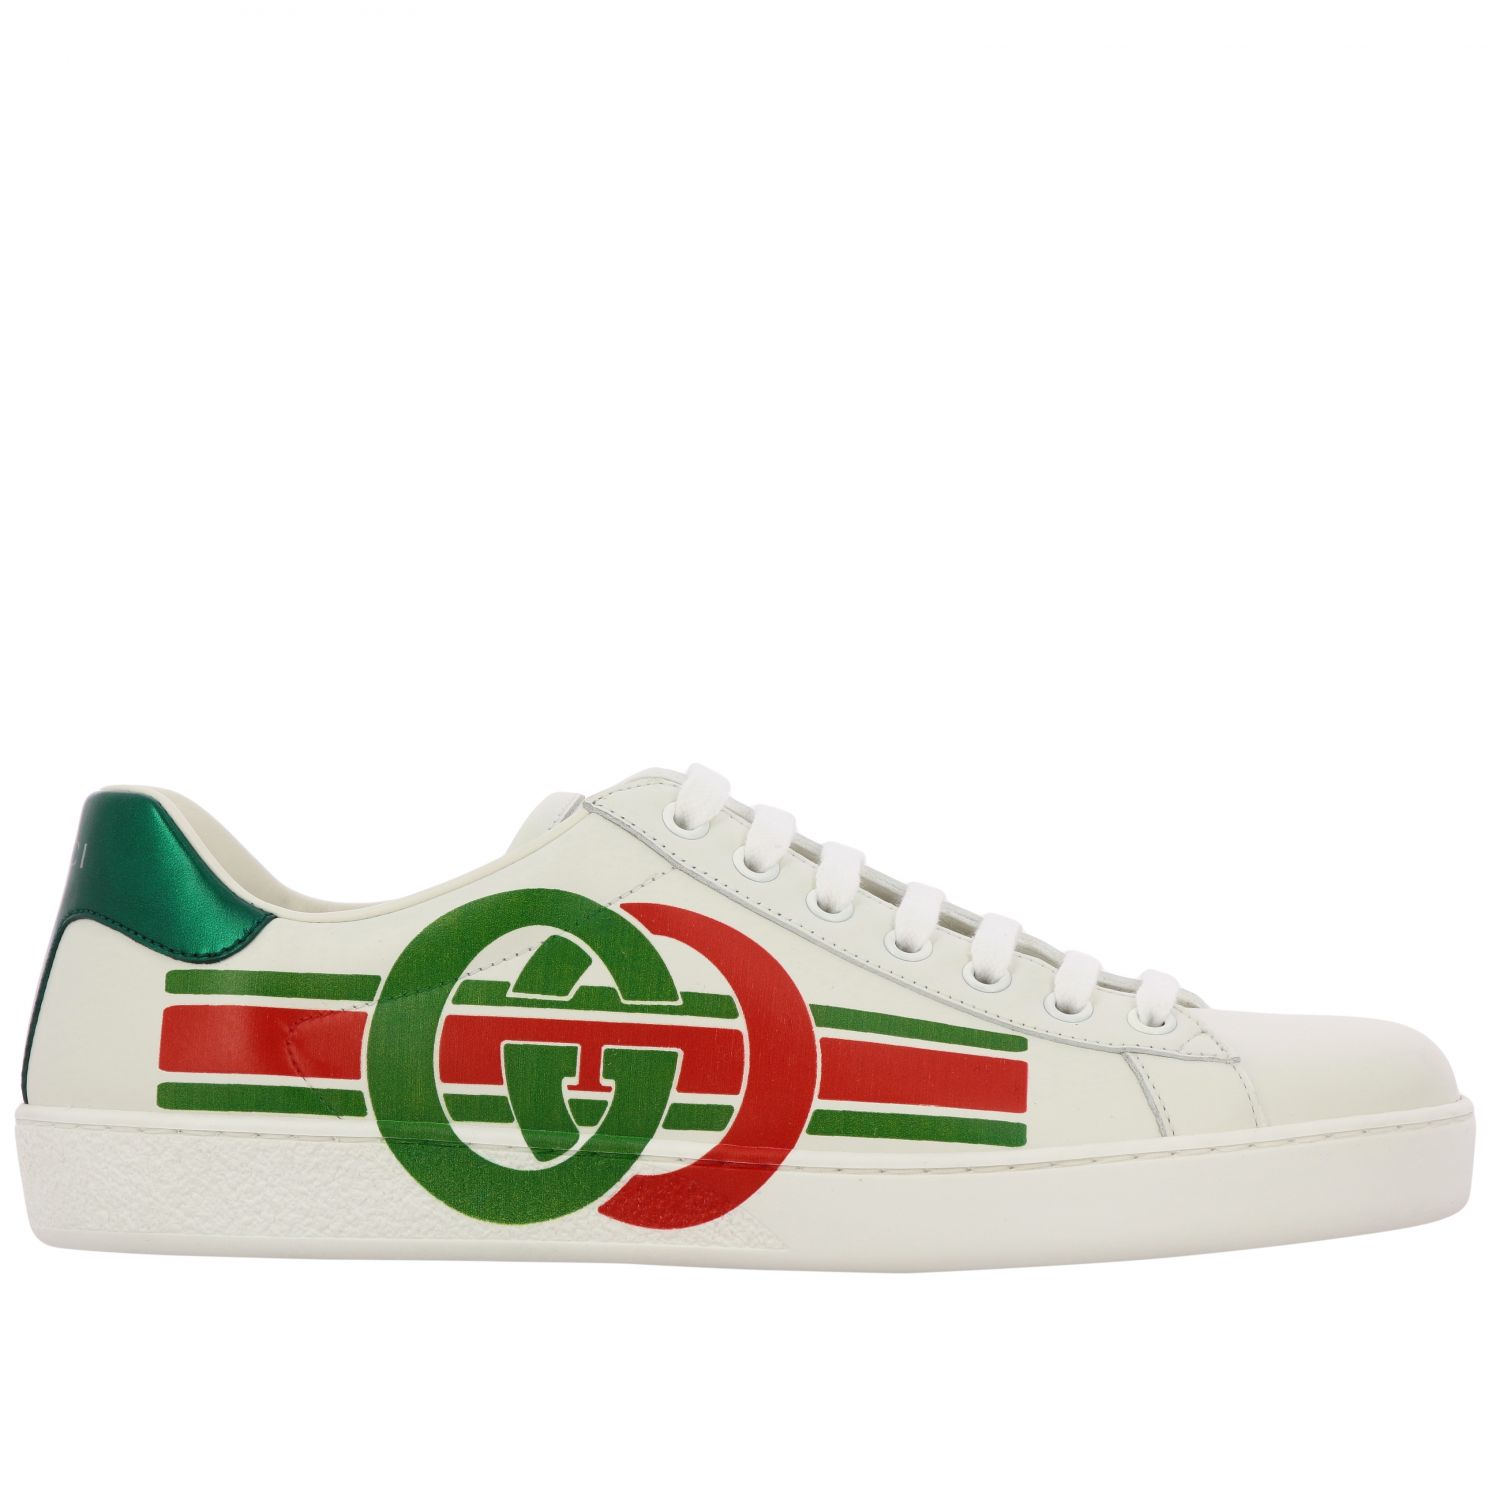 gucci sneaker new ace